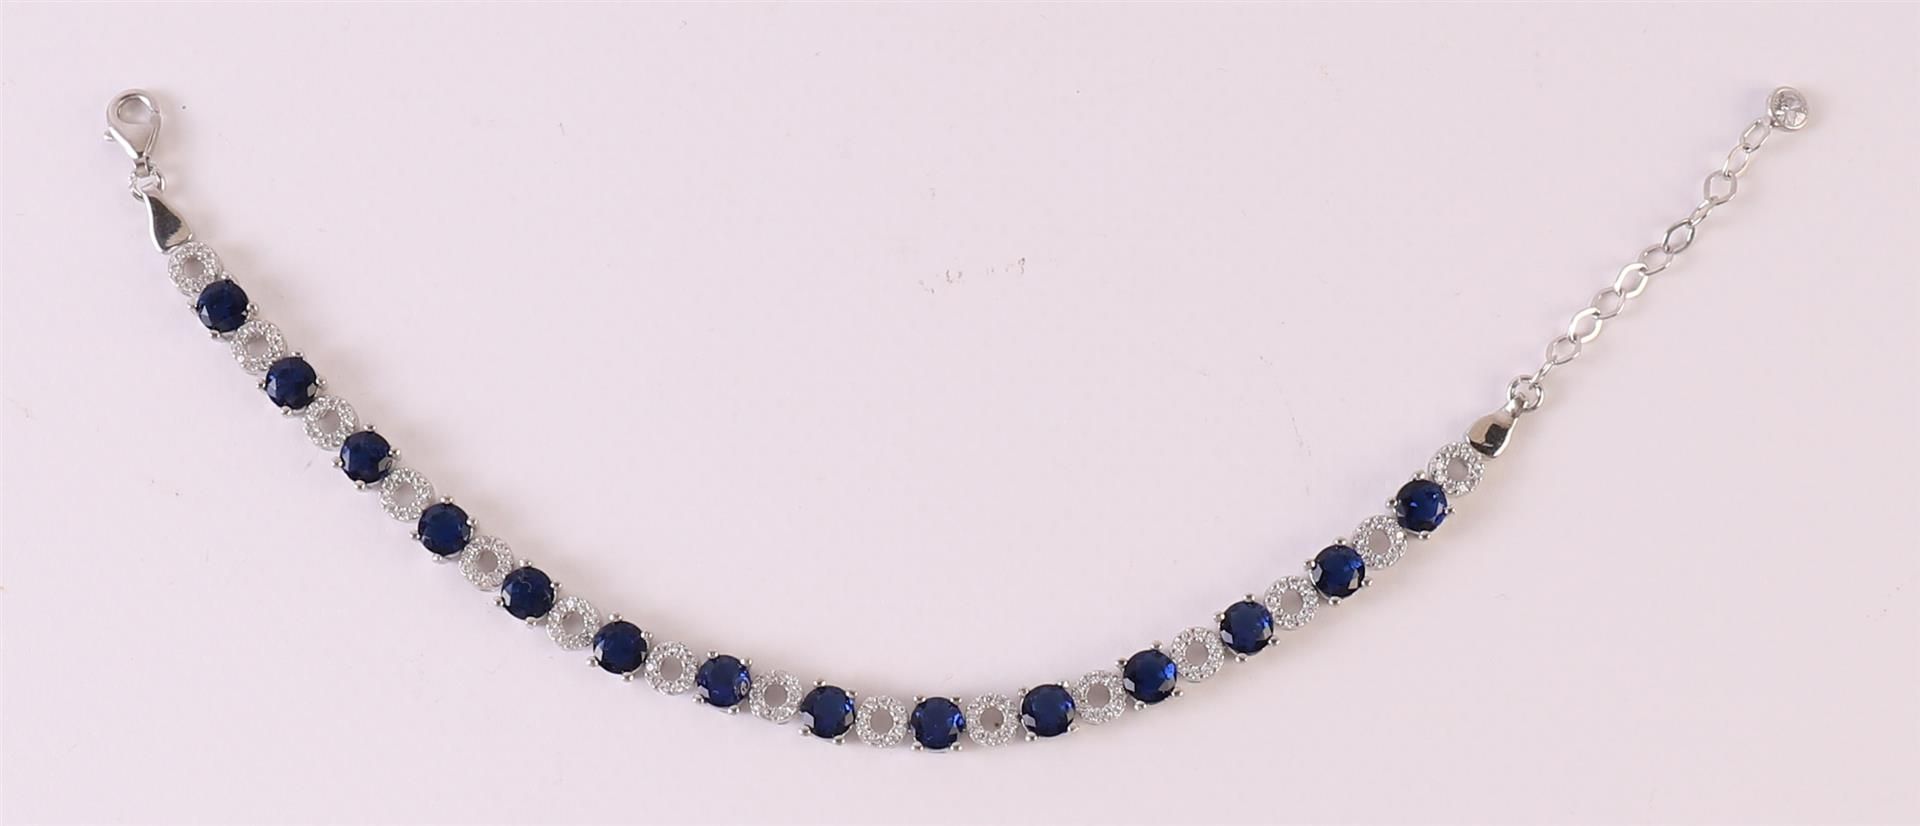 A 1st grade 925/1000 silver tennis bracelet with facet cut blue stones and zirconias. - Image 3 of 3